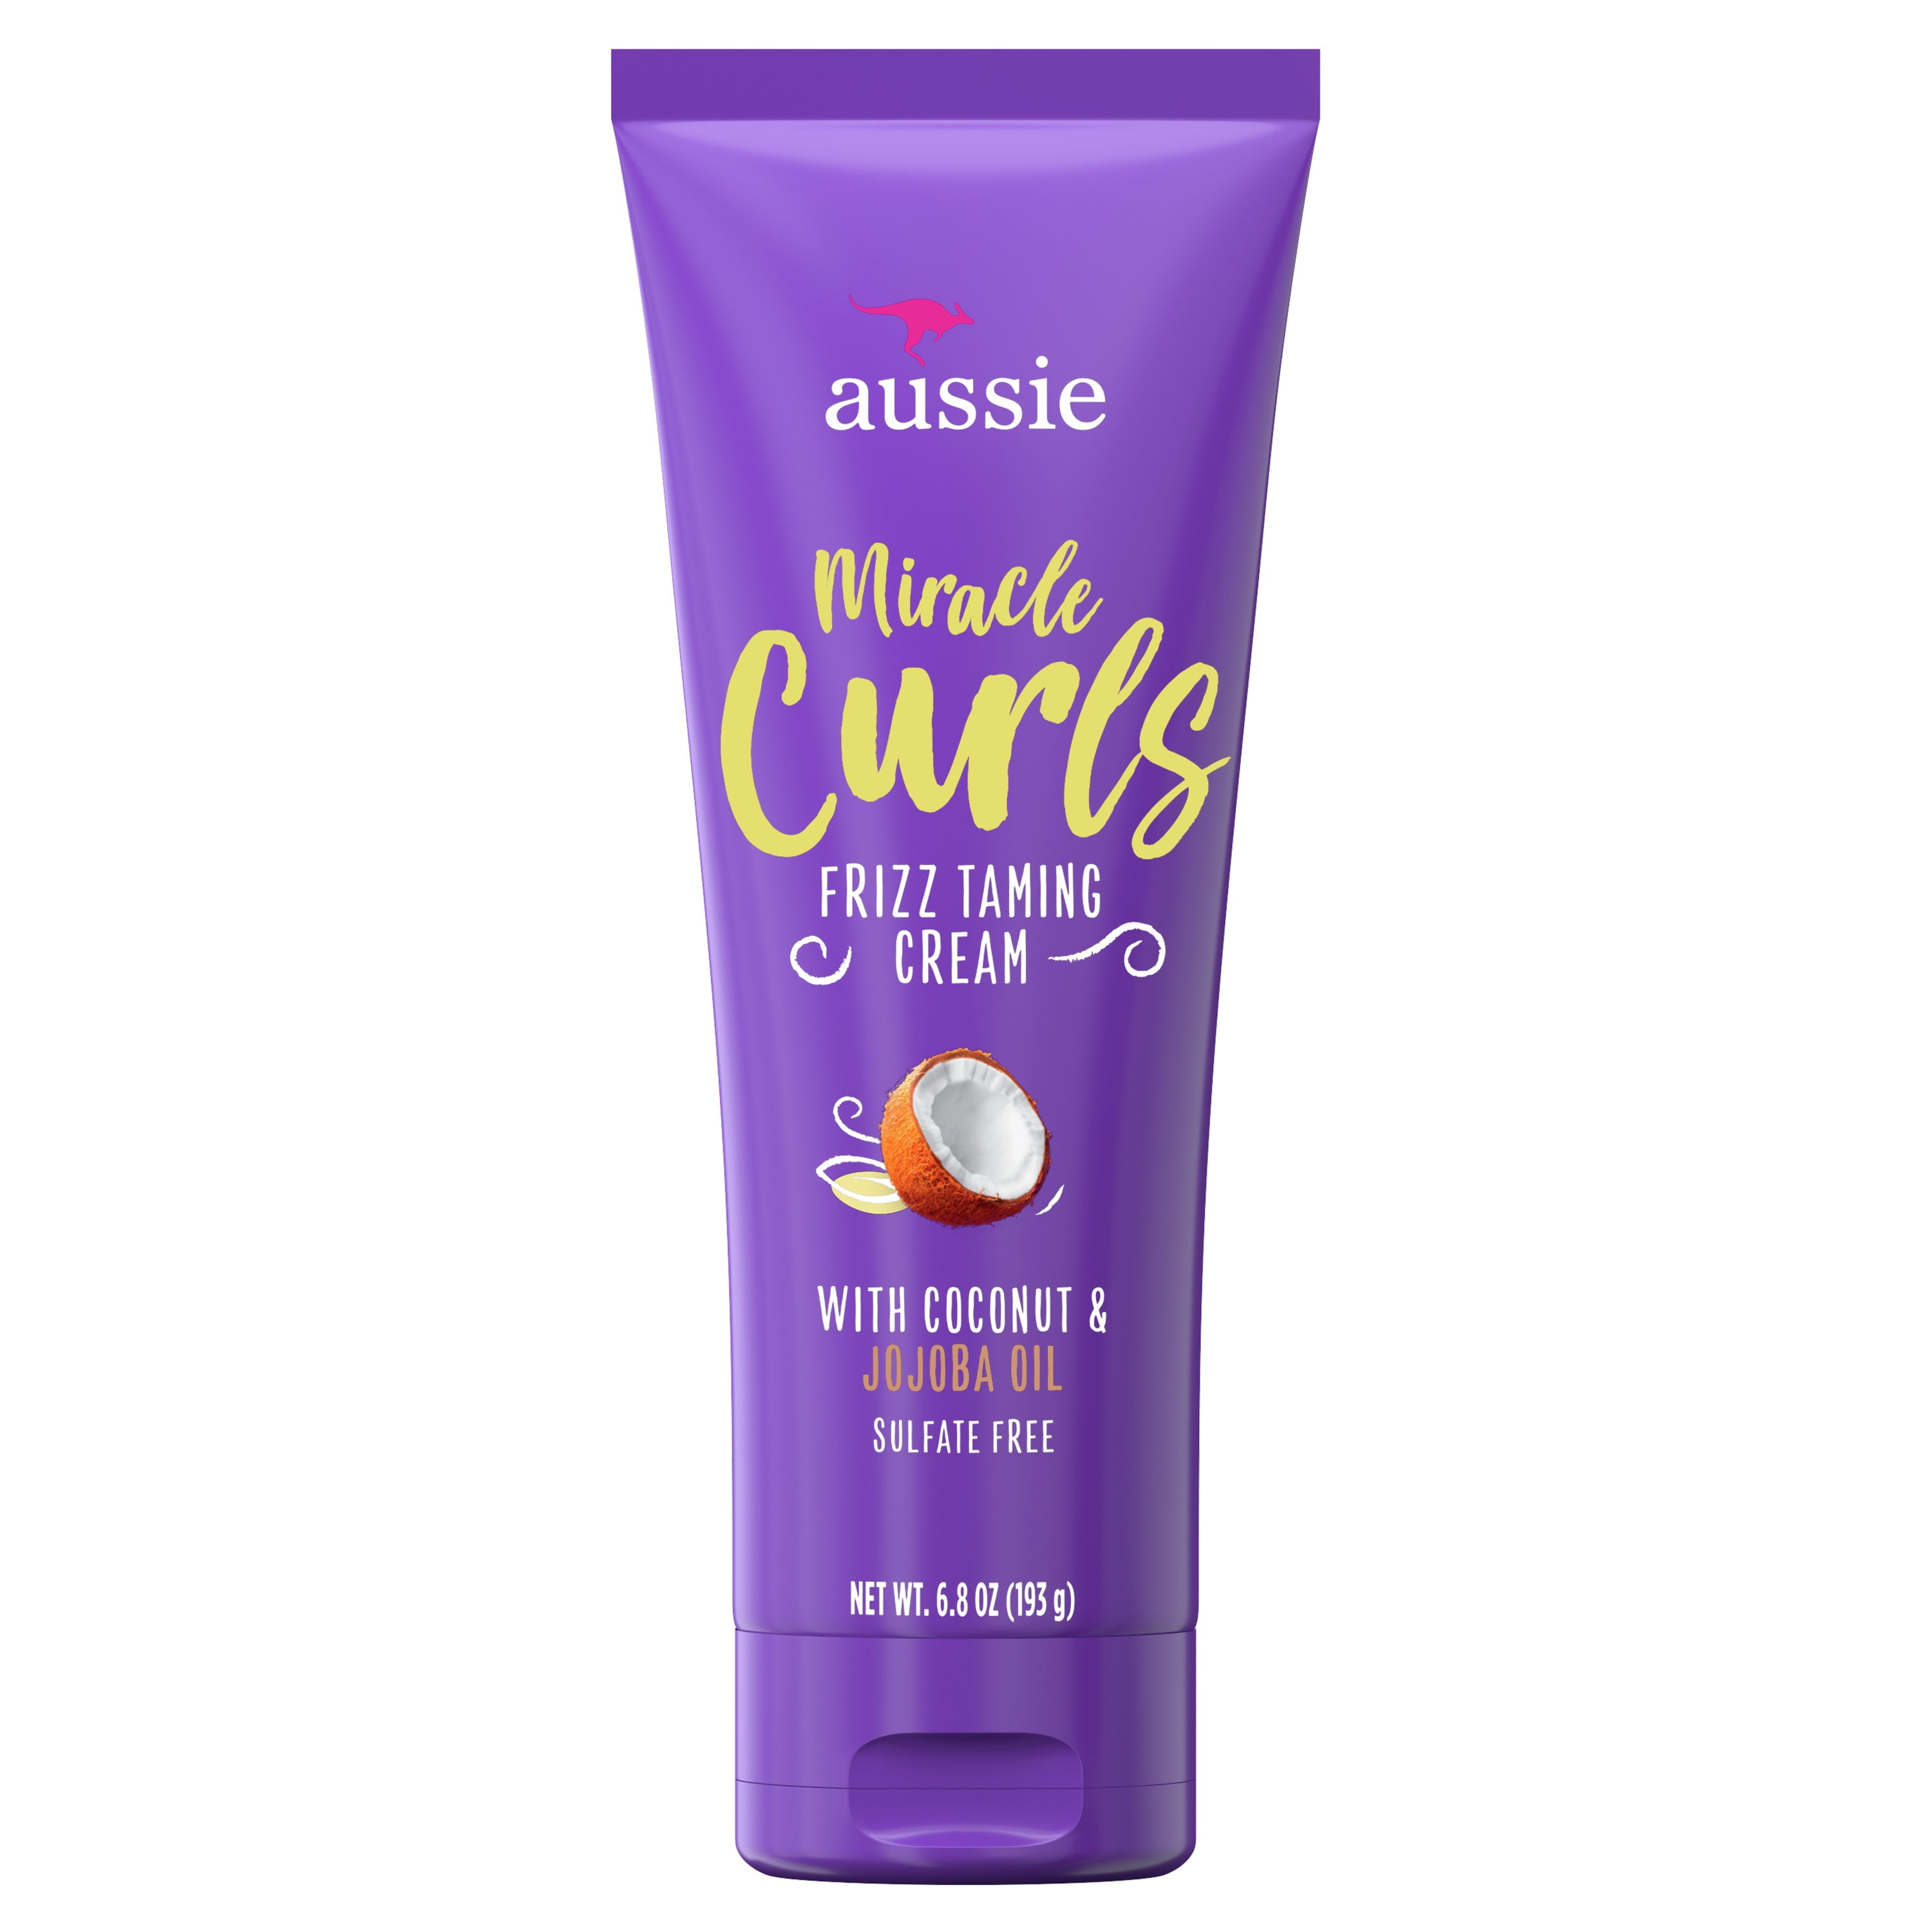 Aussie Miracle Curls Frizz Taming Curl Cream, for Curly Hair 6.8